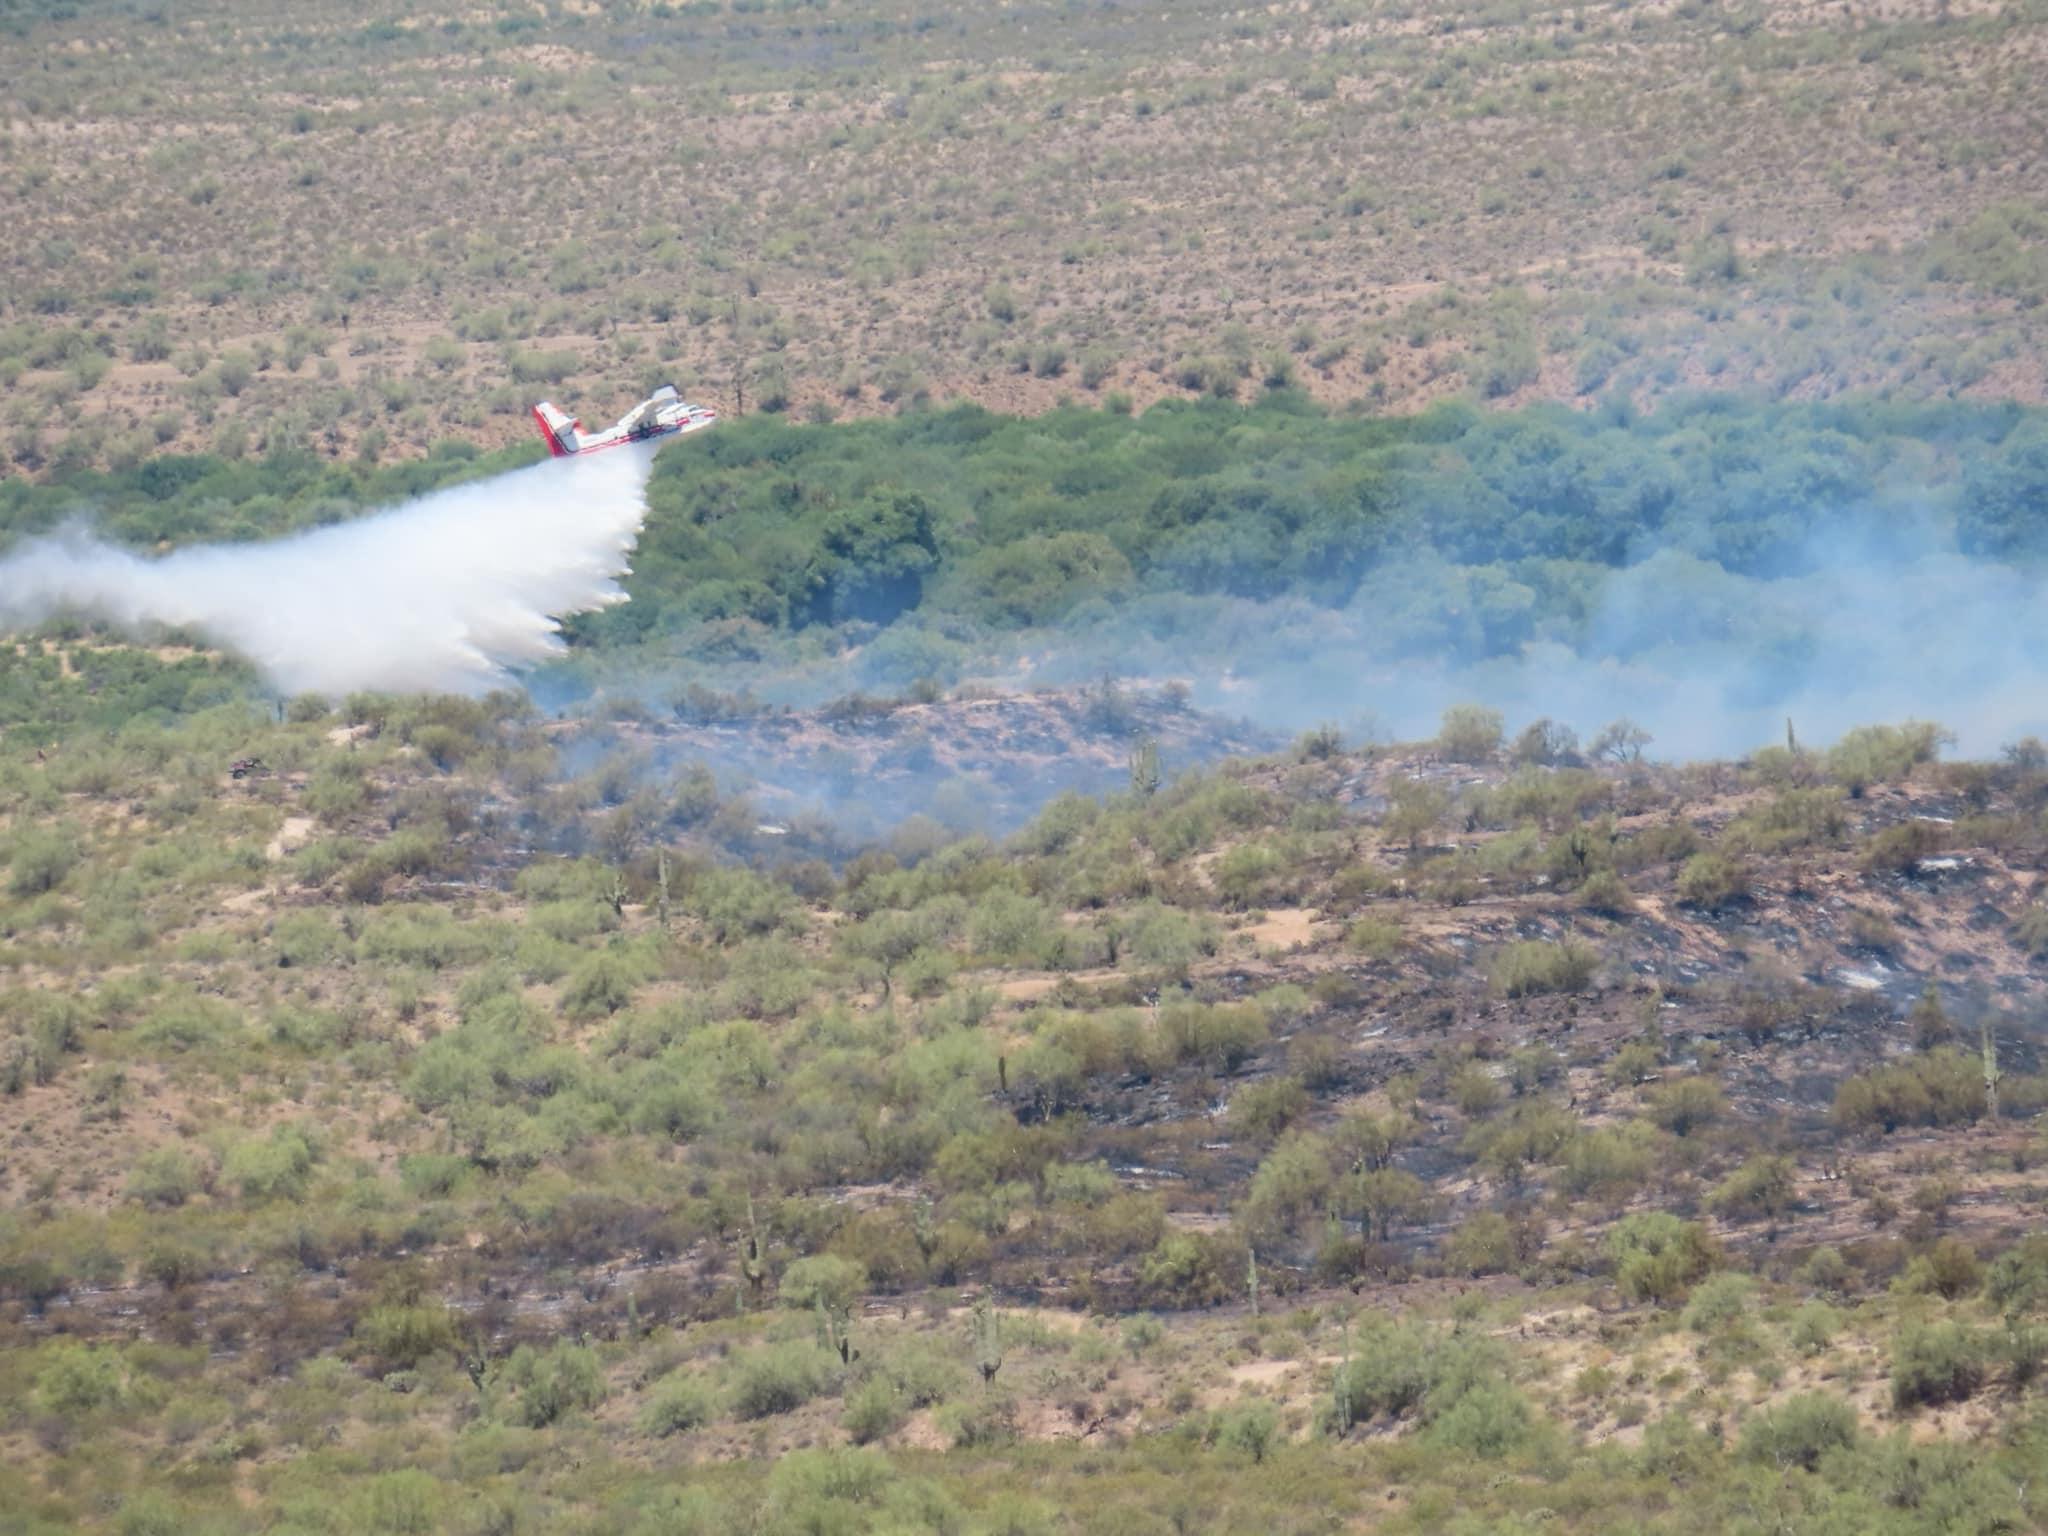 Aircraft dropping water on fire area